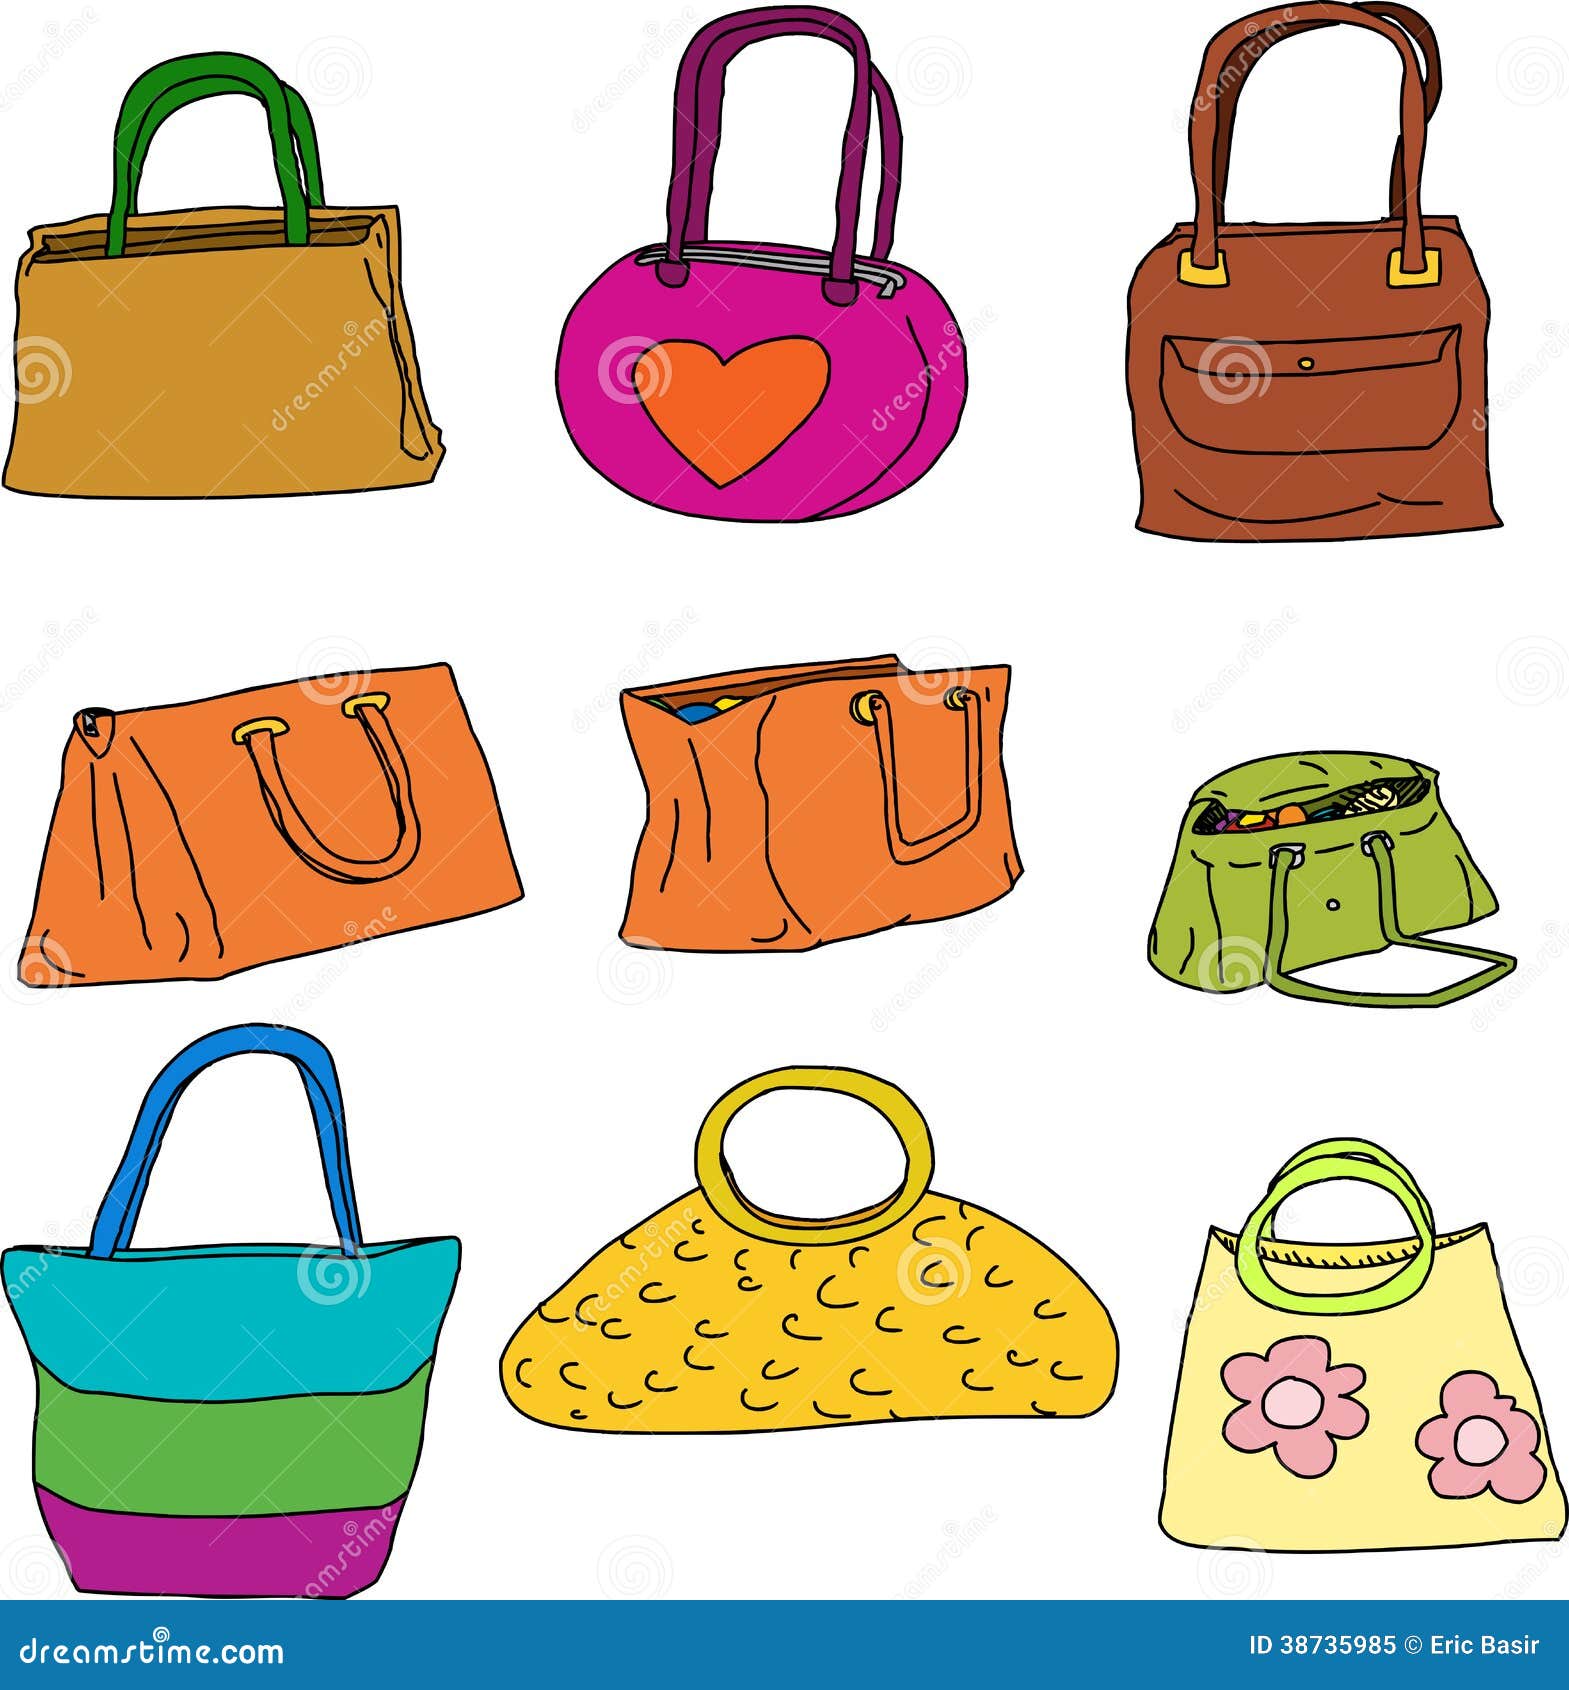 Free Photos - A Collection Of Luxurious, High-quality Purses In Various  Colors And Patterns. These Handbags Are Crafted With Fine Detailing And Are  On Display, Possibly For Sale Or Exhibition. The Purses